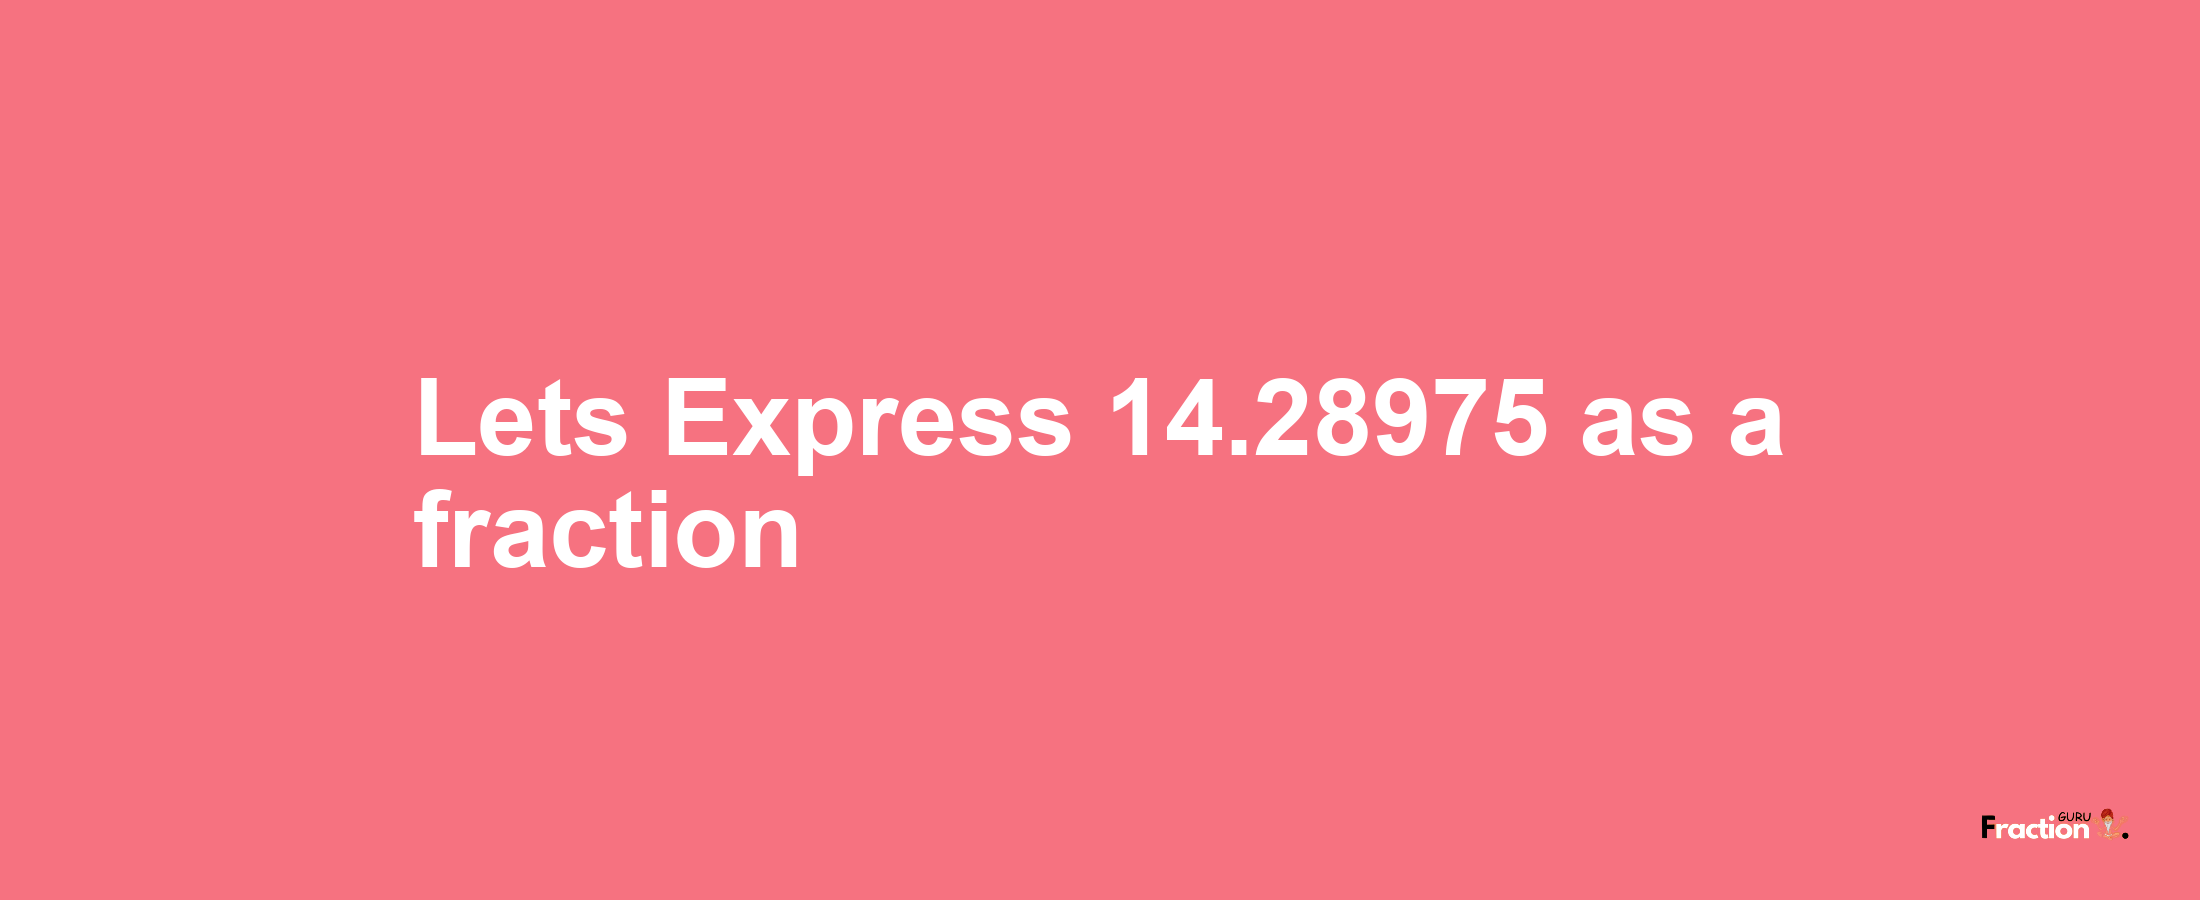 Lets Express 14.28975 as afraction